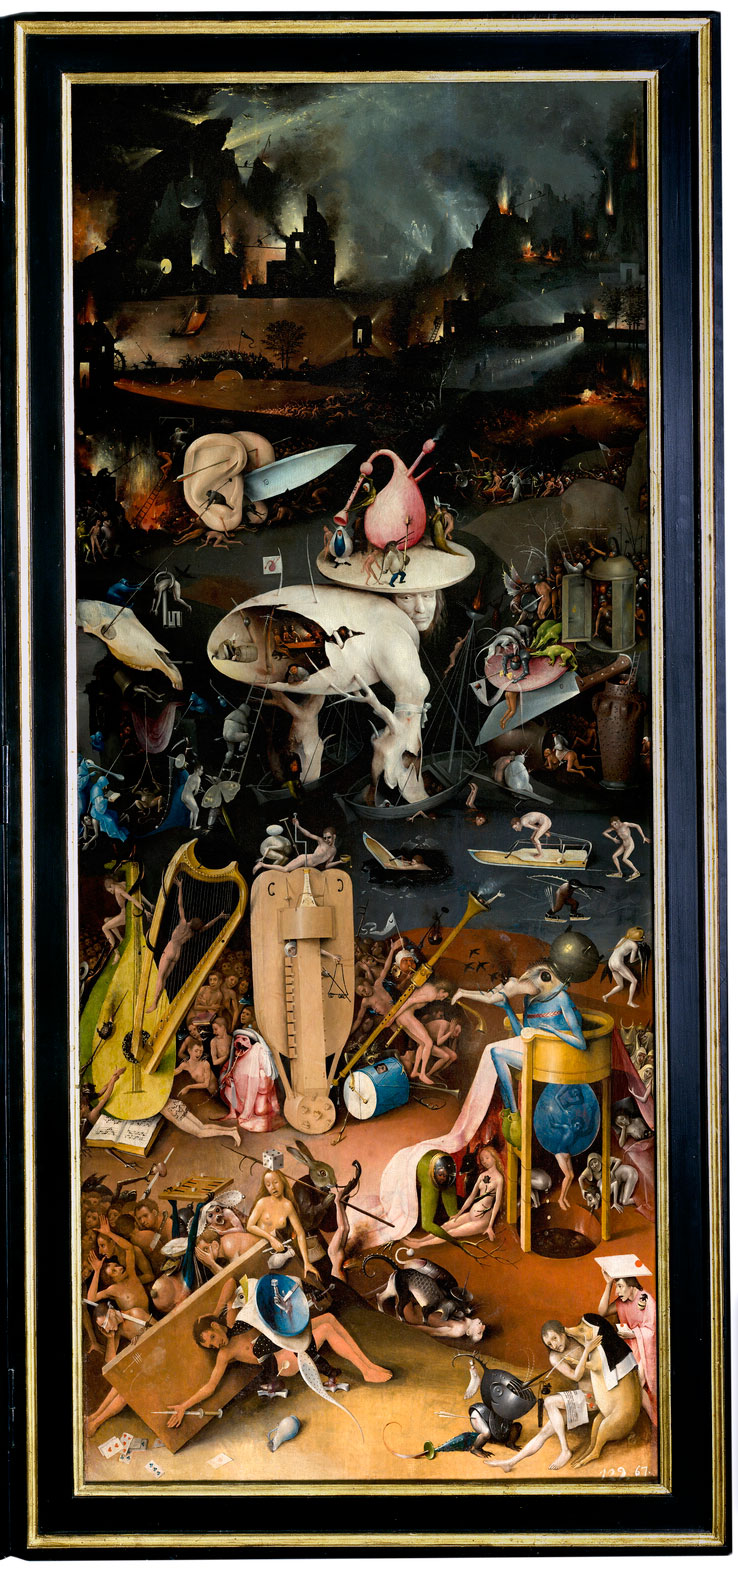 hieronymus bosch   the garden of earthly delights 6 Paradise: A Modern Day Interpretation of the Garden of Earthly Delights